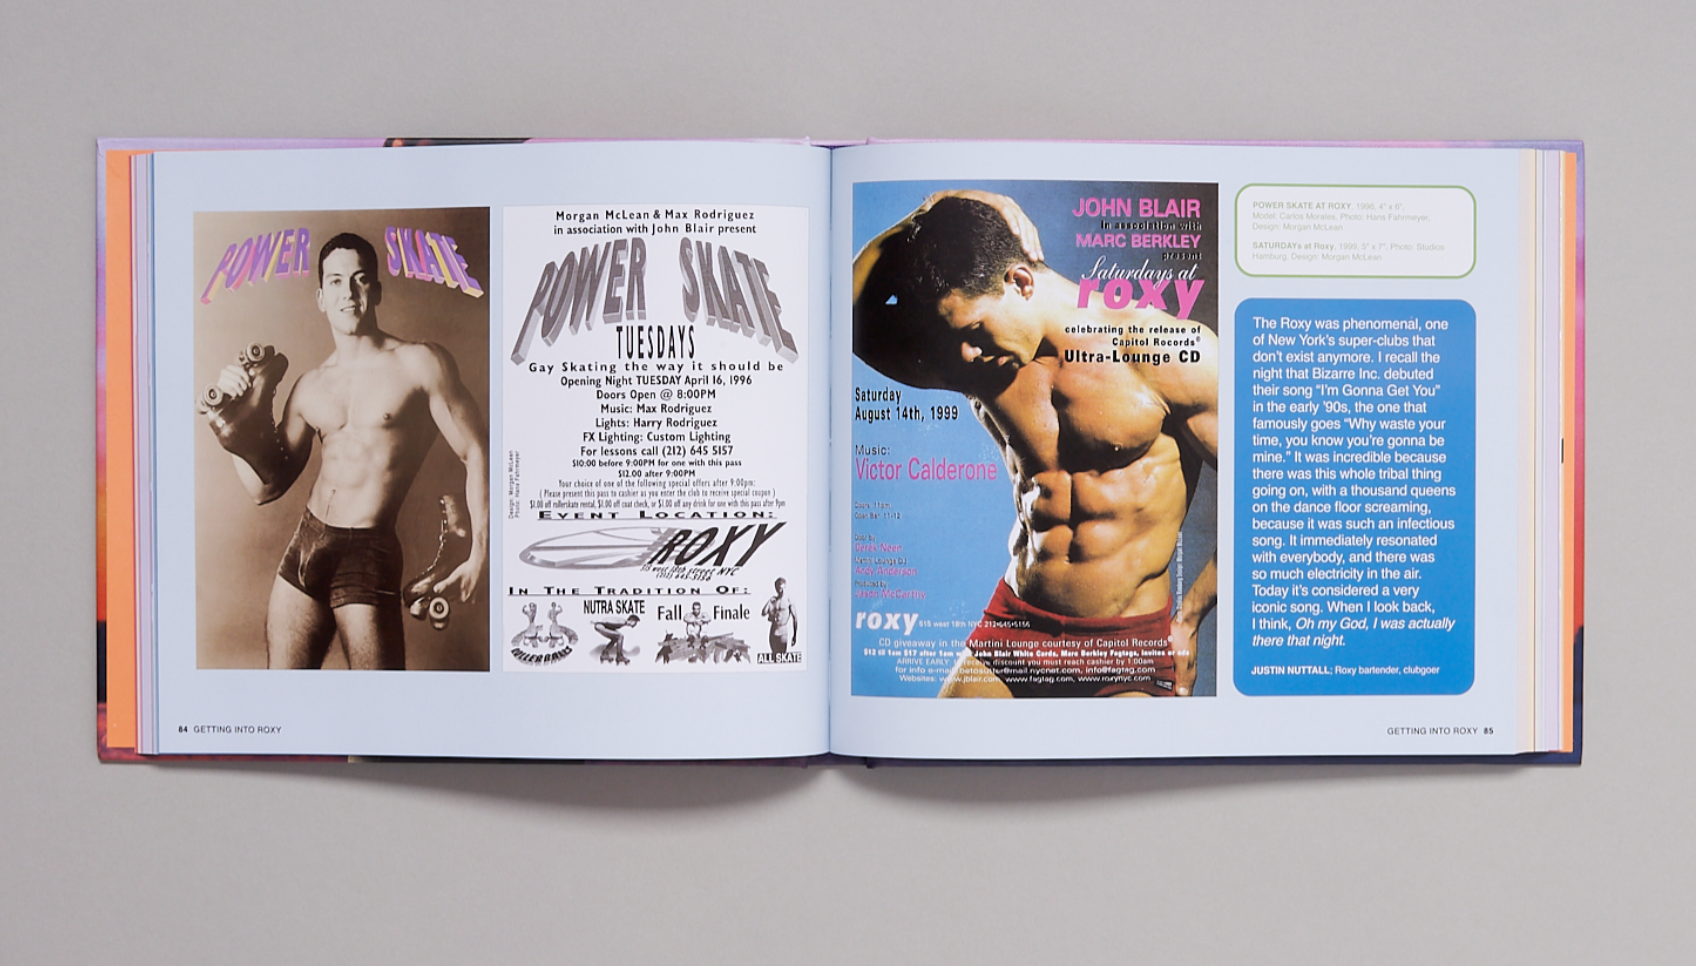 David Kennerley Getting In: NYC Club Flyers from The Gay 1990s